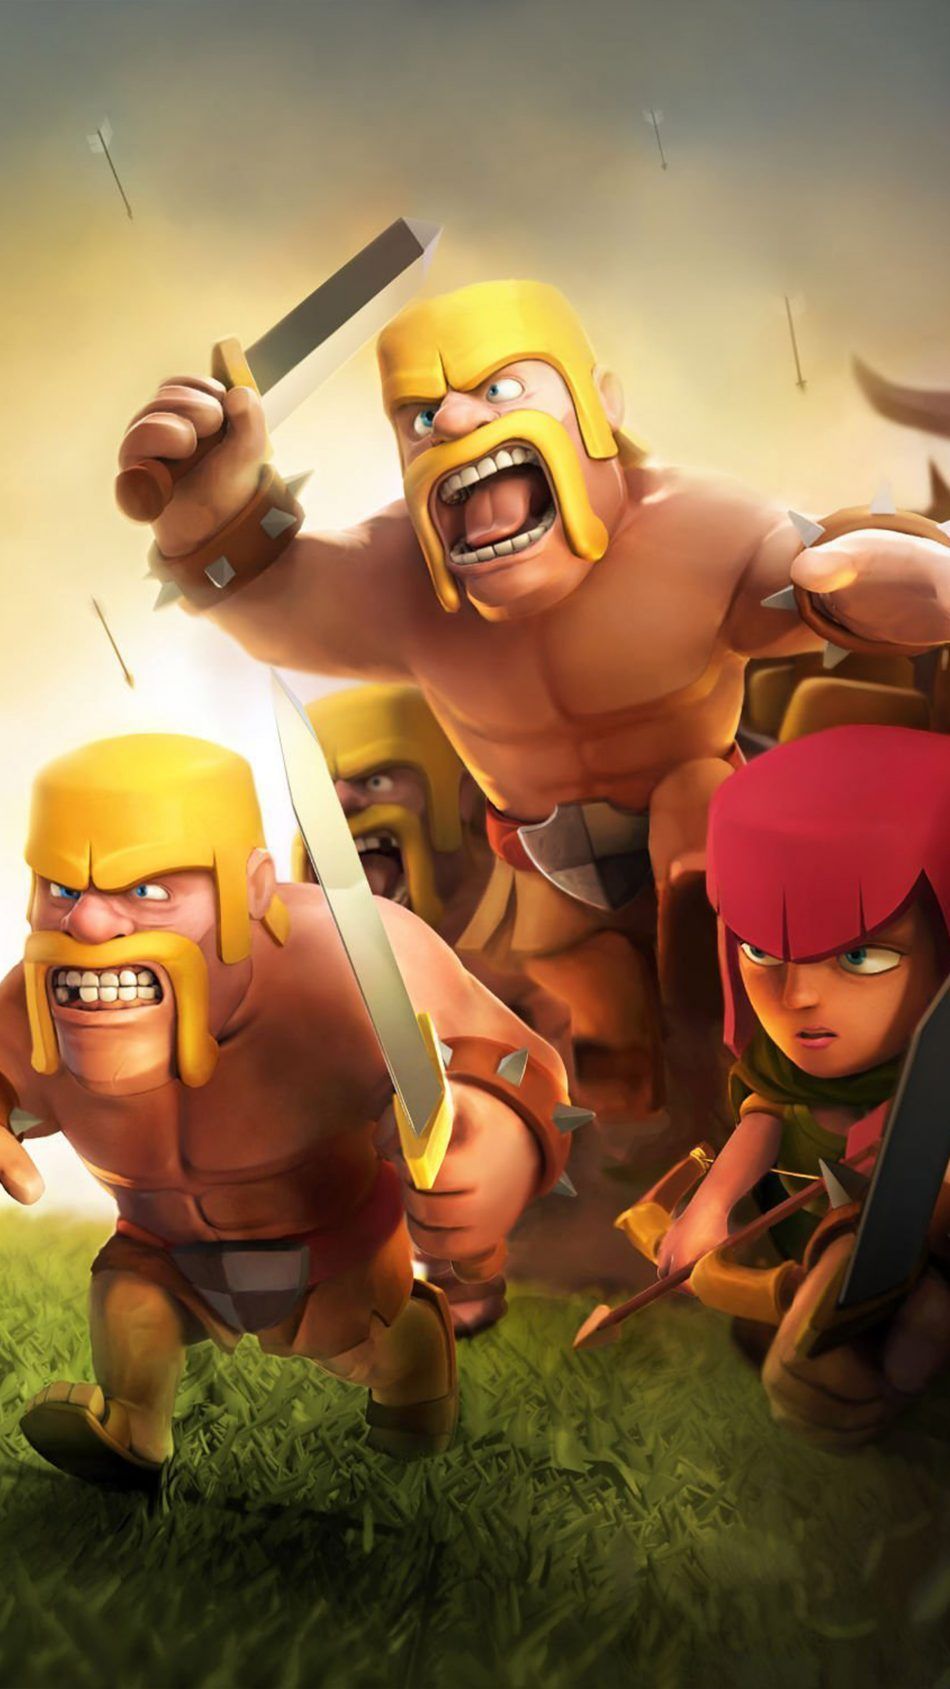 Clash of Clans Mobile Game 4K Ultra HD Mobile Wallpaper. Clash of clans, Clash of clans hack, Mobile game